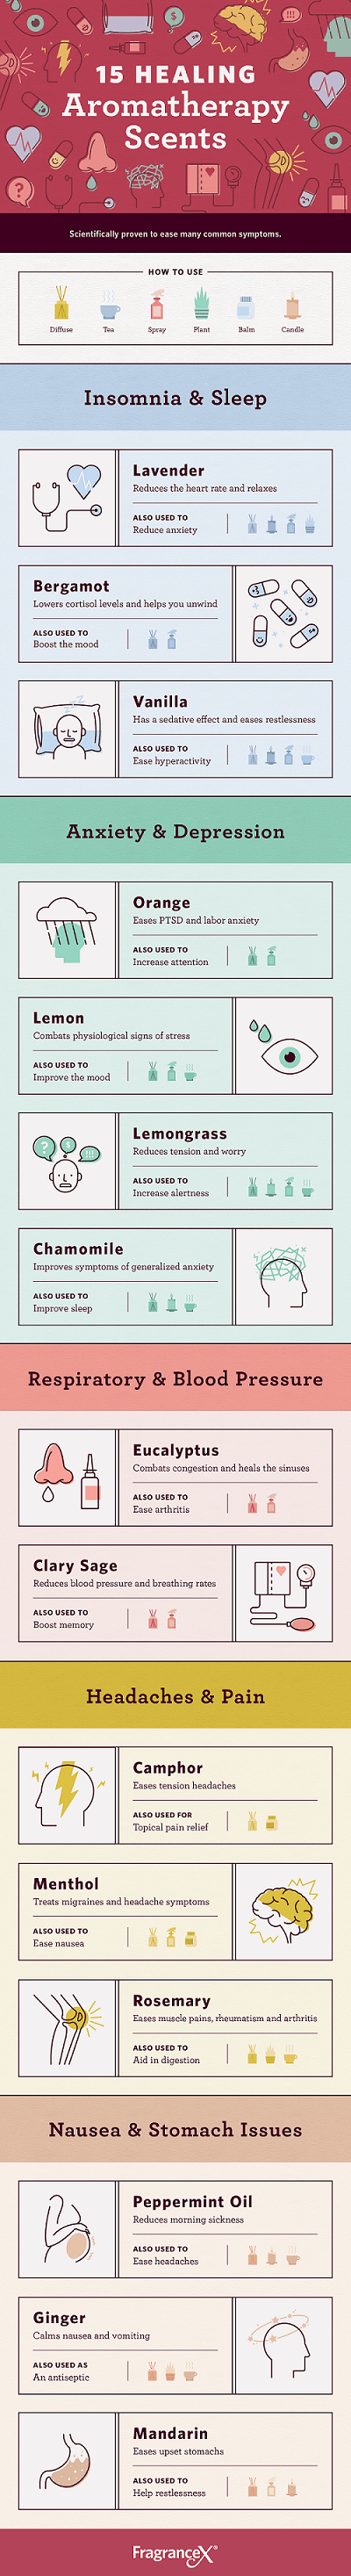 15 aromatherapy scents